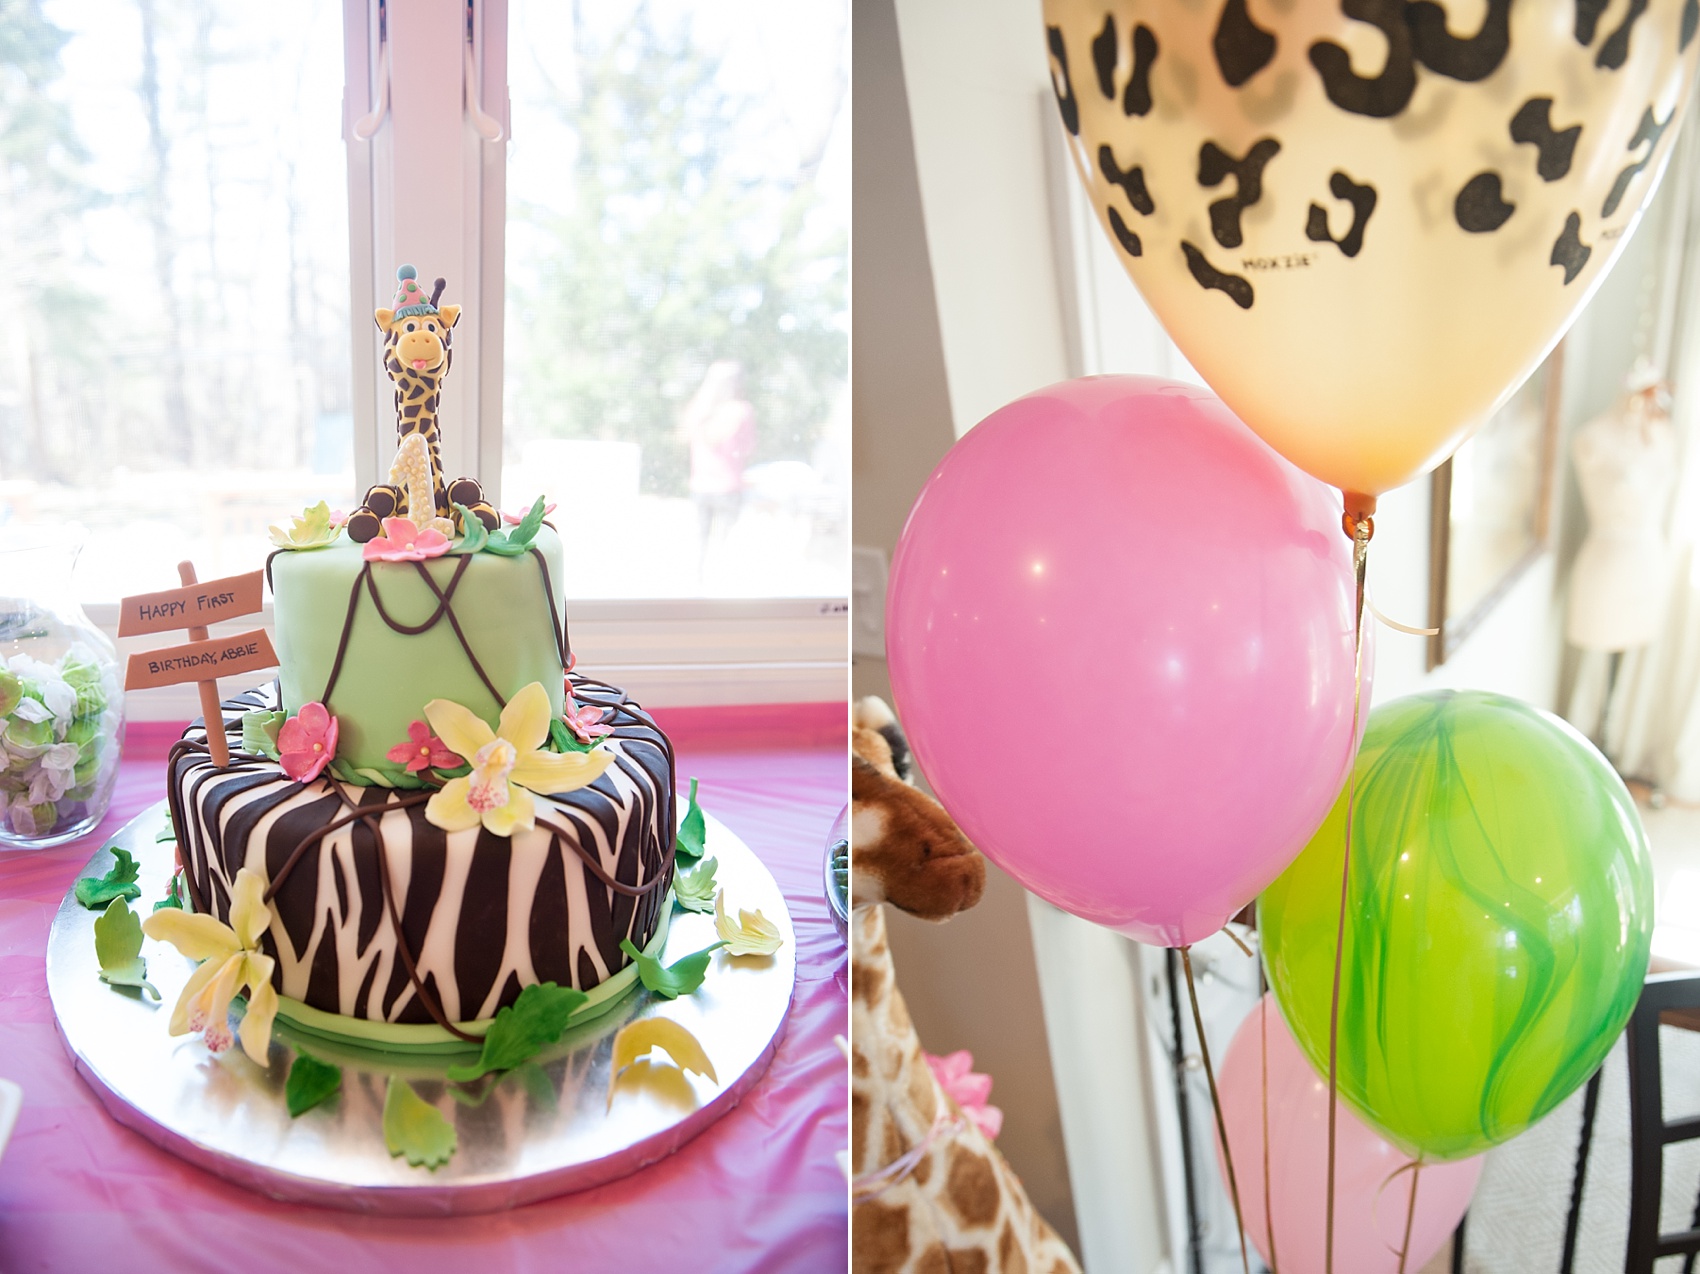 Jungle theme first birthday balloons and giraffe cake. Photos by Mikkel Paige Photography.